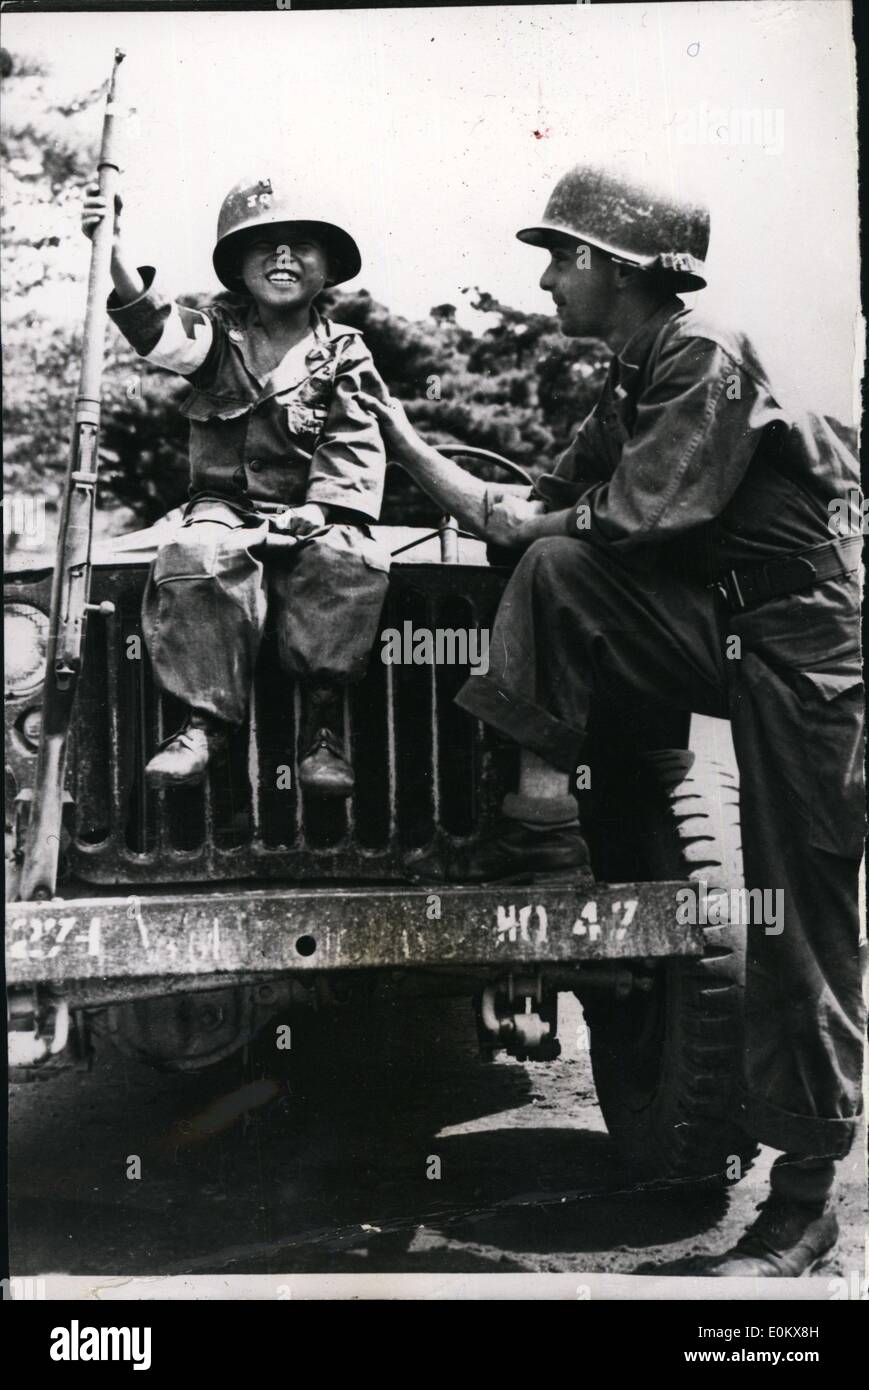 Oct. 10, 1950 - Korean mascot. Photo shows Little Joe, a South Korean orphan adopted by a medical company of the 25th Infantry Division U.S. Army proudly displays a captured North Korean weapon to Col. Joseph Sennice, of Schenectady, NY. Stock Photo